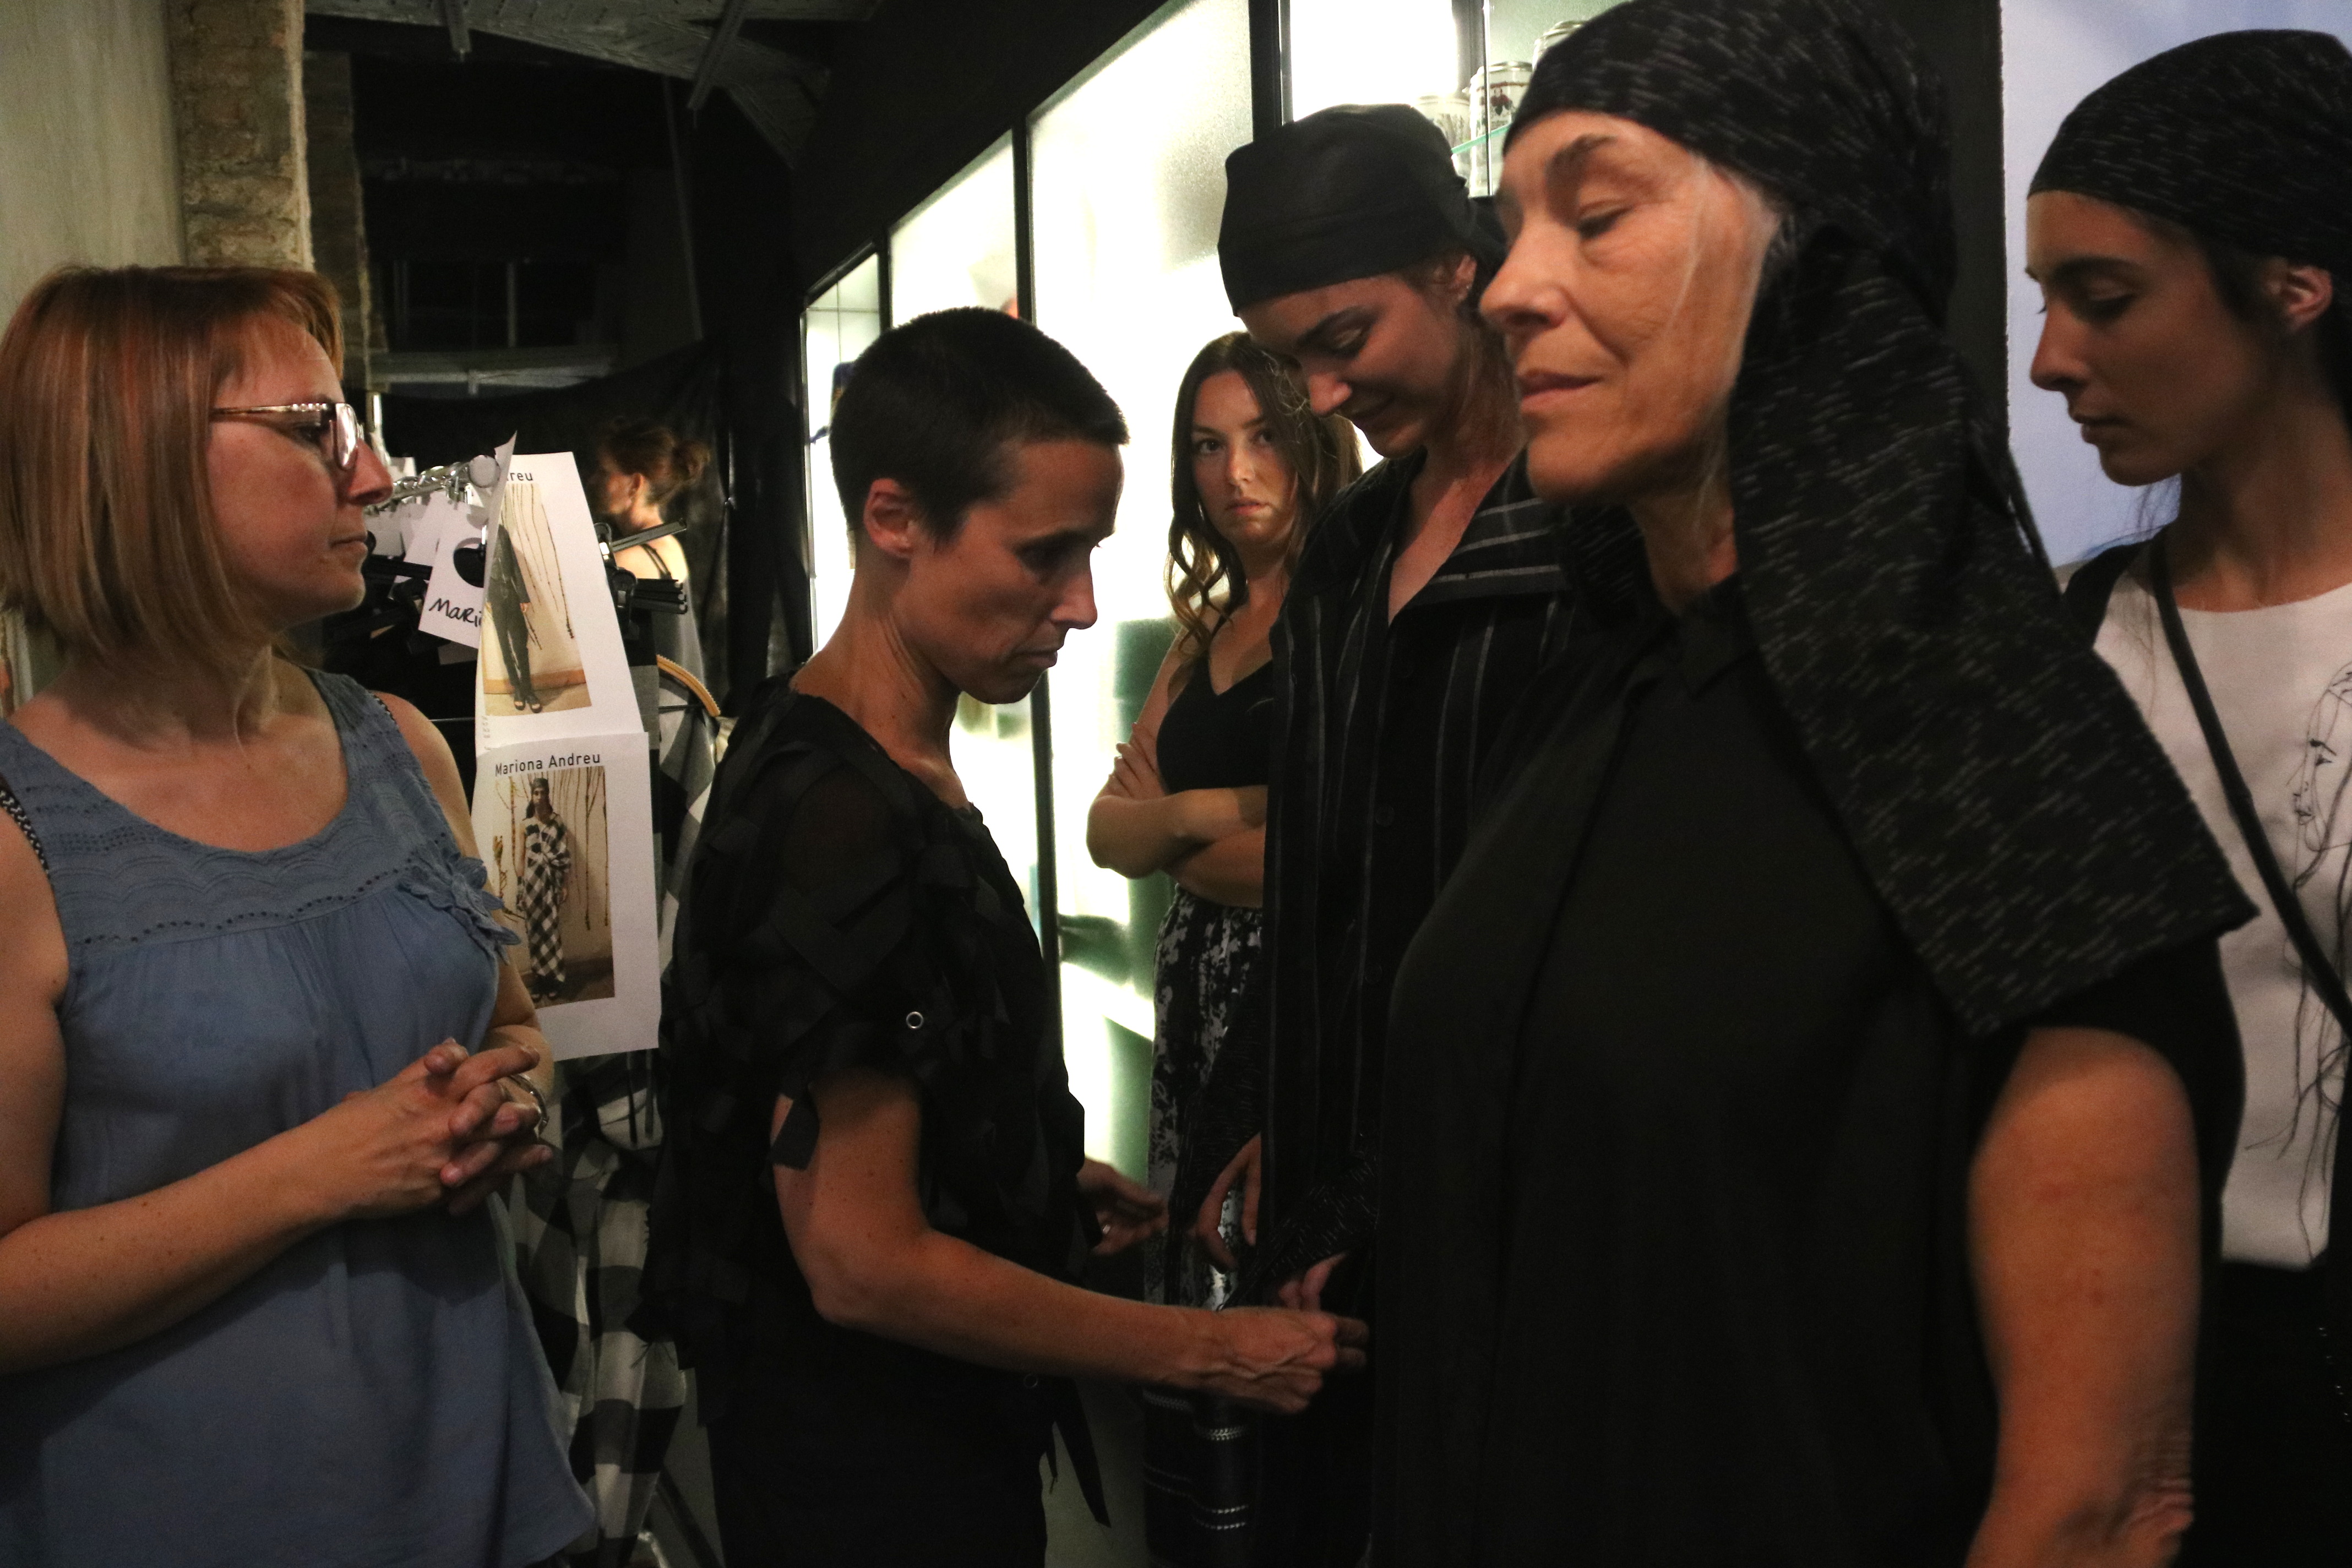 Míriam Ponsa and some of the models wearing her clothing on June 26, 2019 (Aina Martí/ACN)